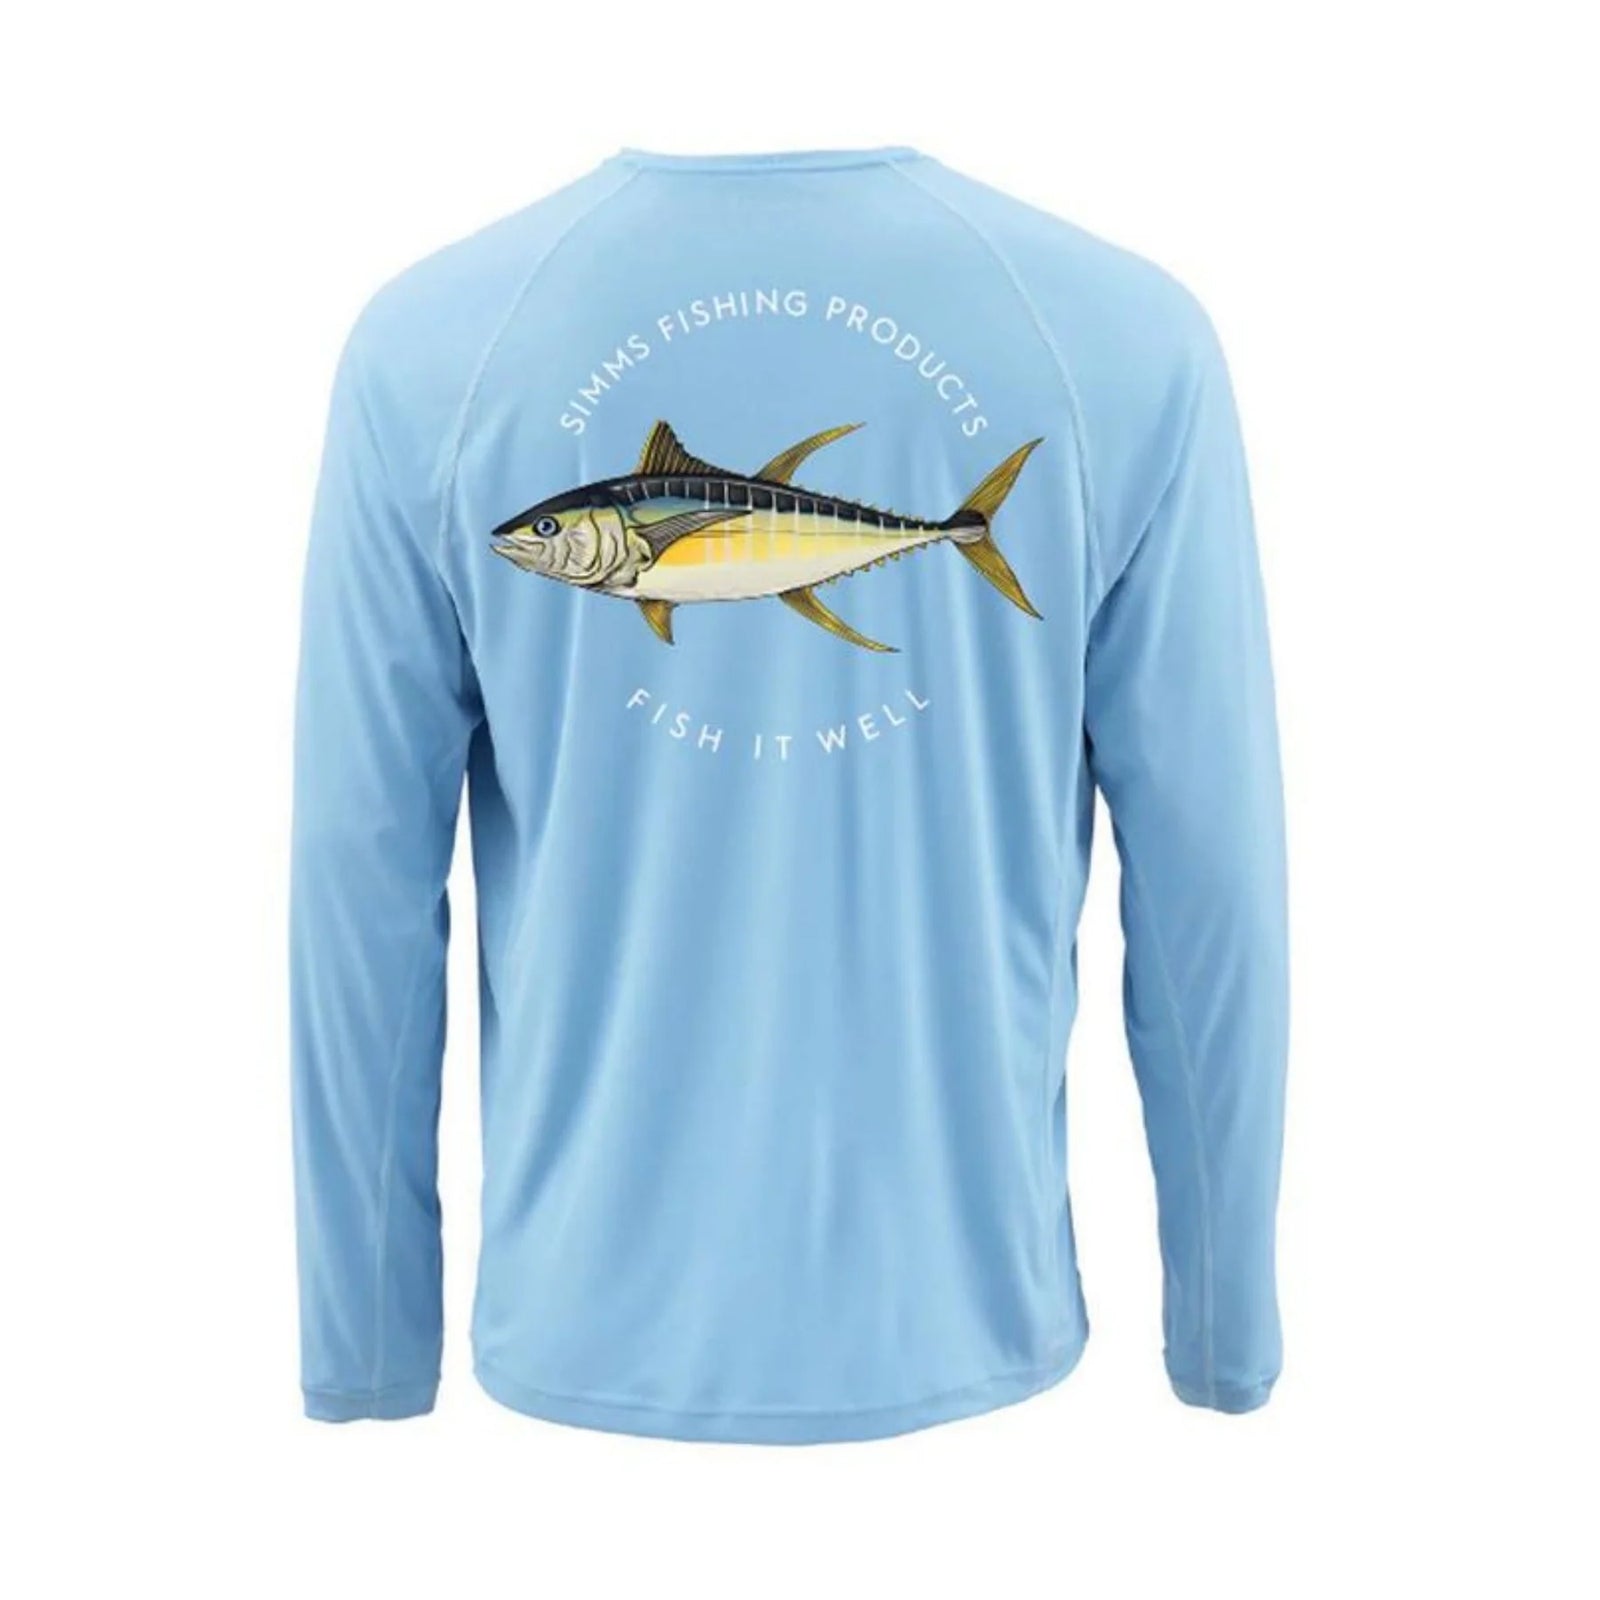 Simms Tagged Shirt - Compleat Angler Nedlands Pro Tackle